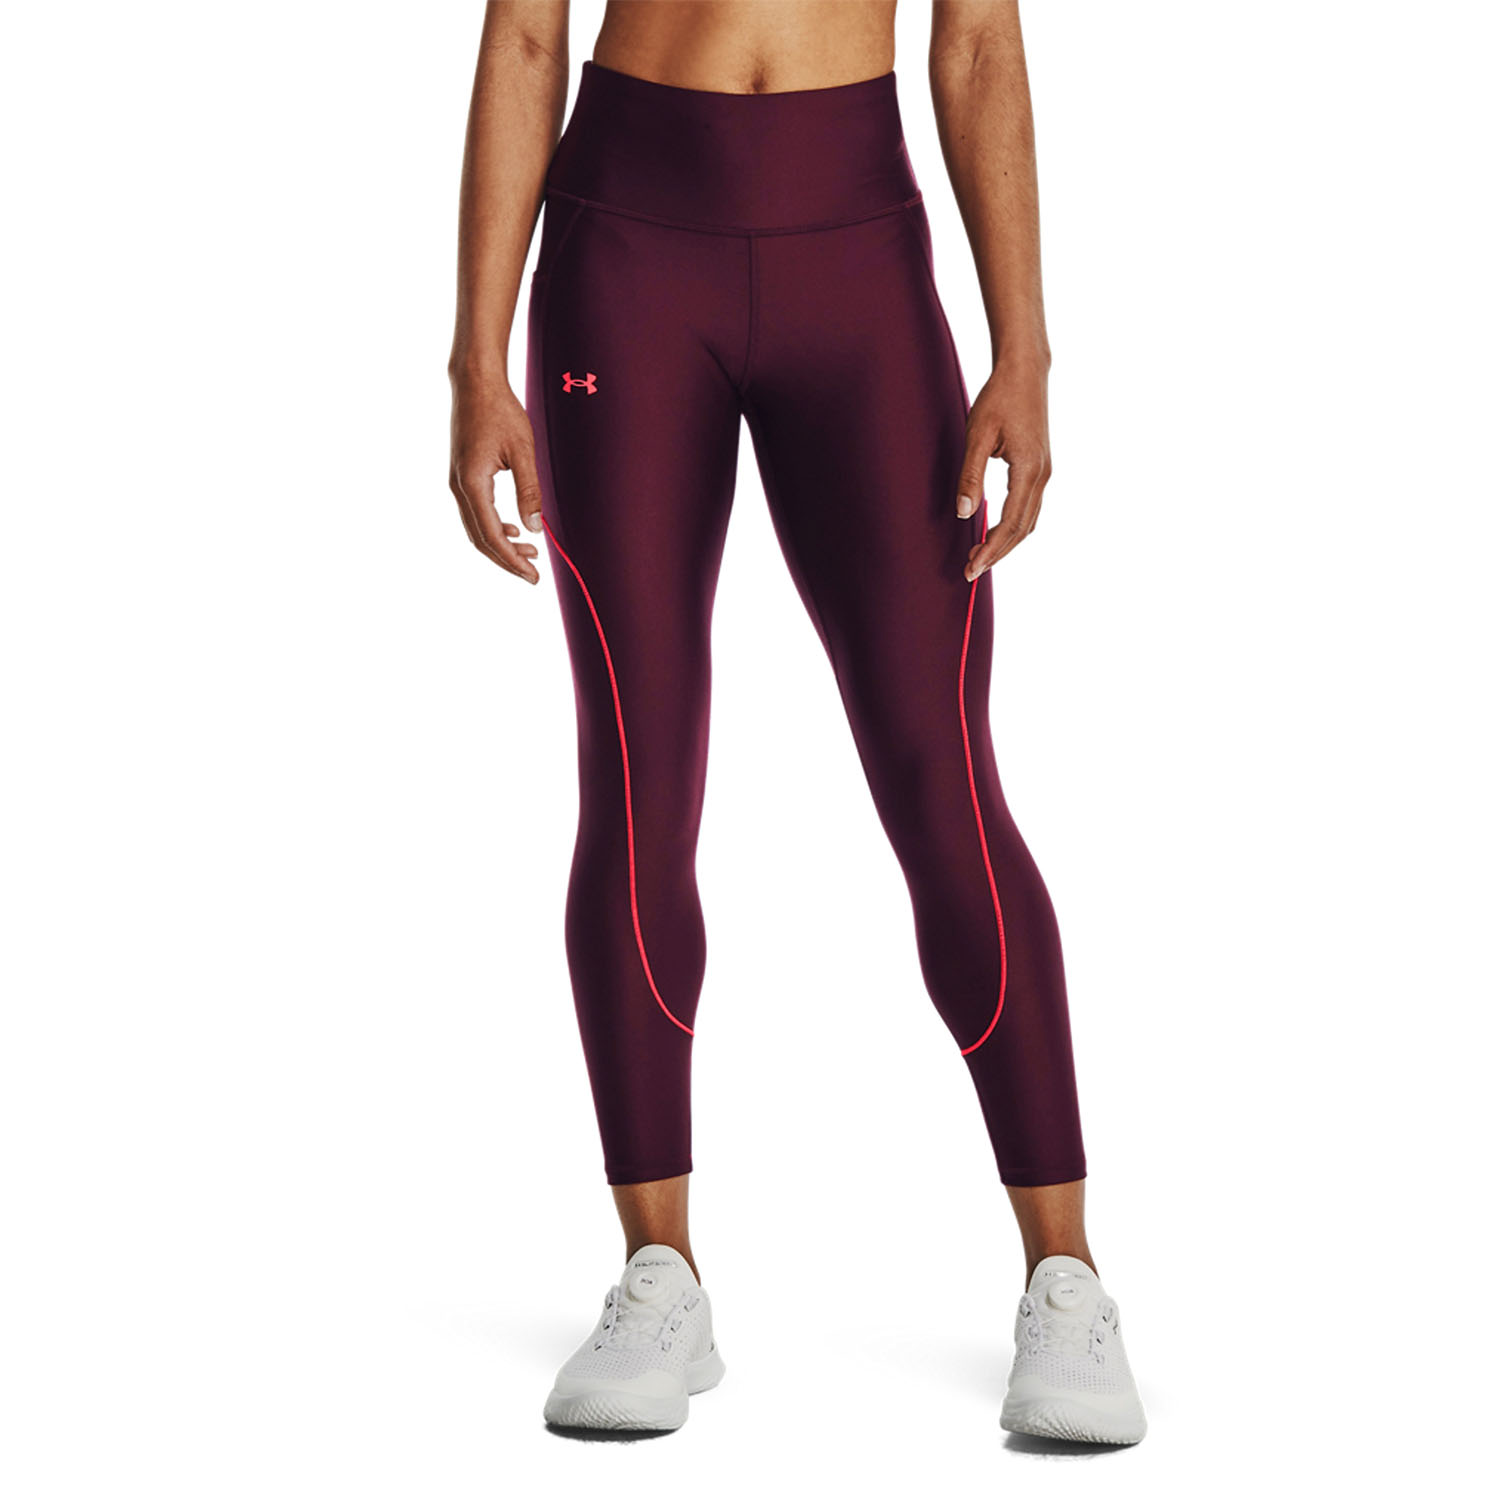 Under Armour Novelty Tights - Red/Black